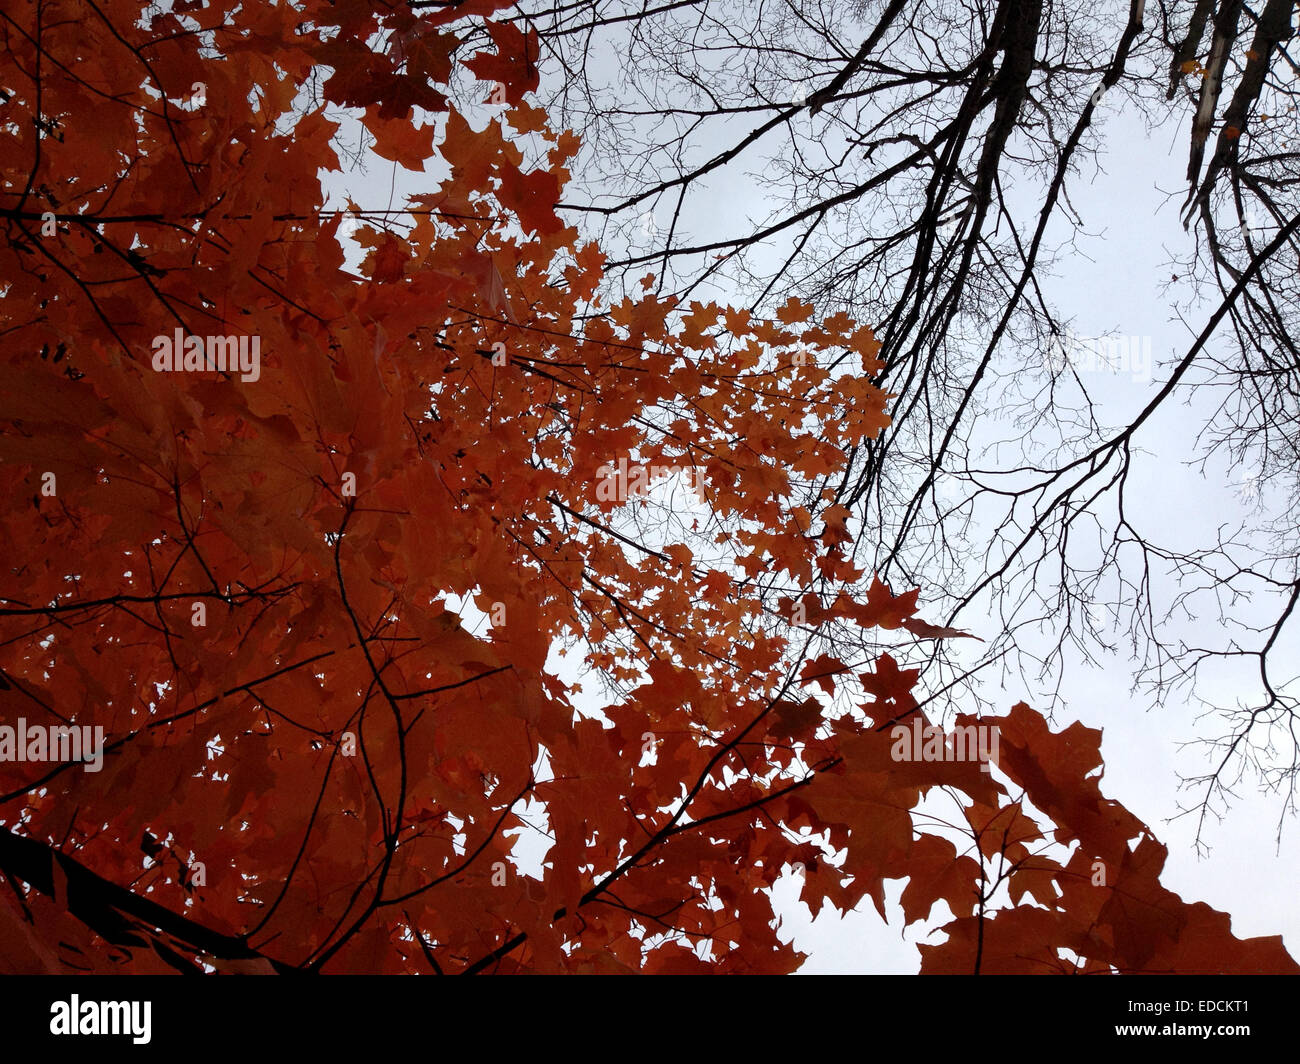 Low-angle shot Change of season from autumn to winter in a Canadian park Contrast of red leafs clusters & slender brown branches Stock Photo